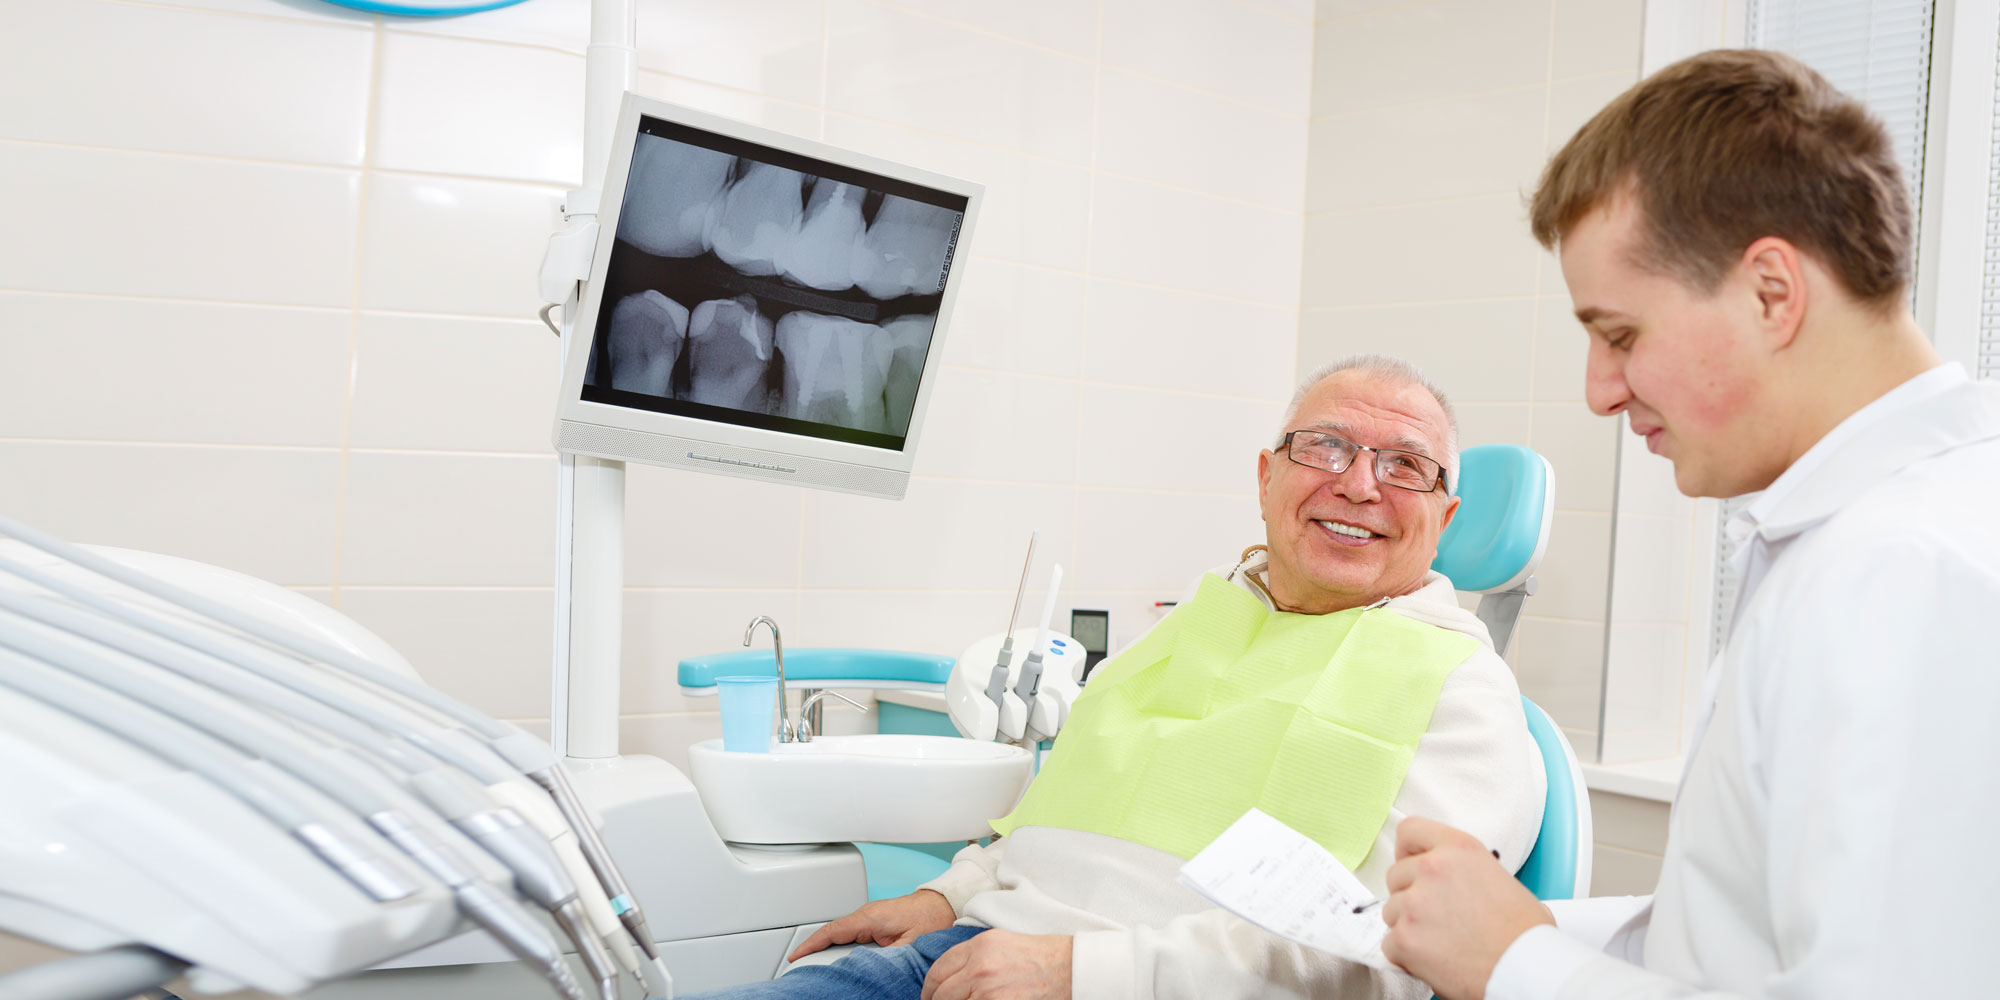 dentist discussing implant options olderman